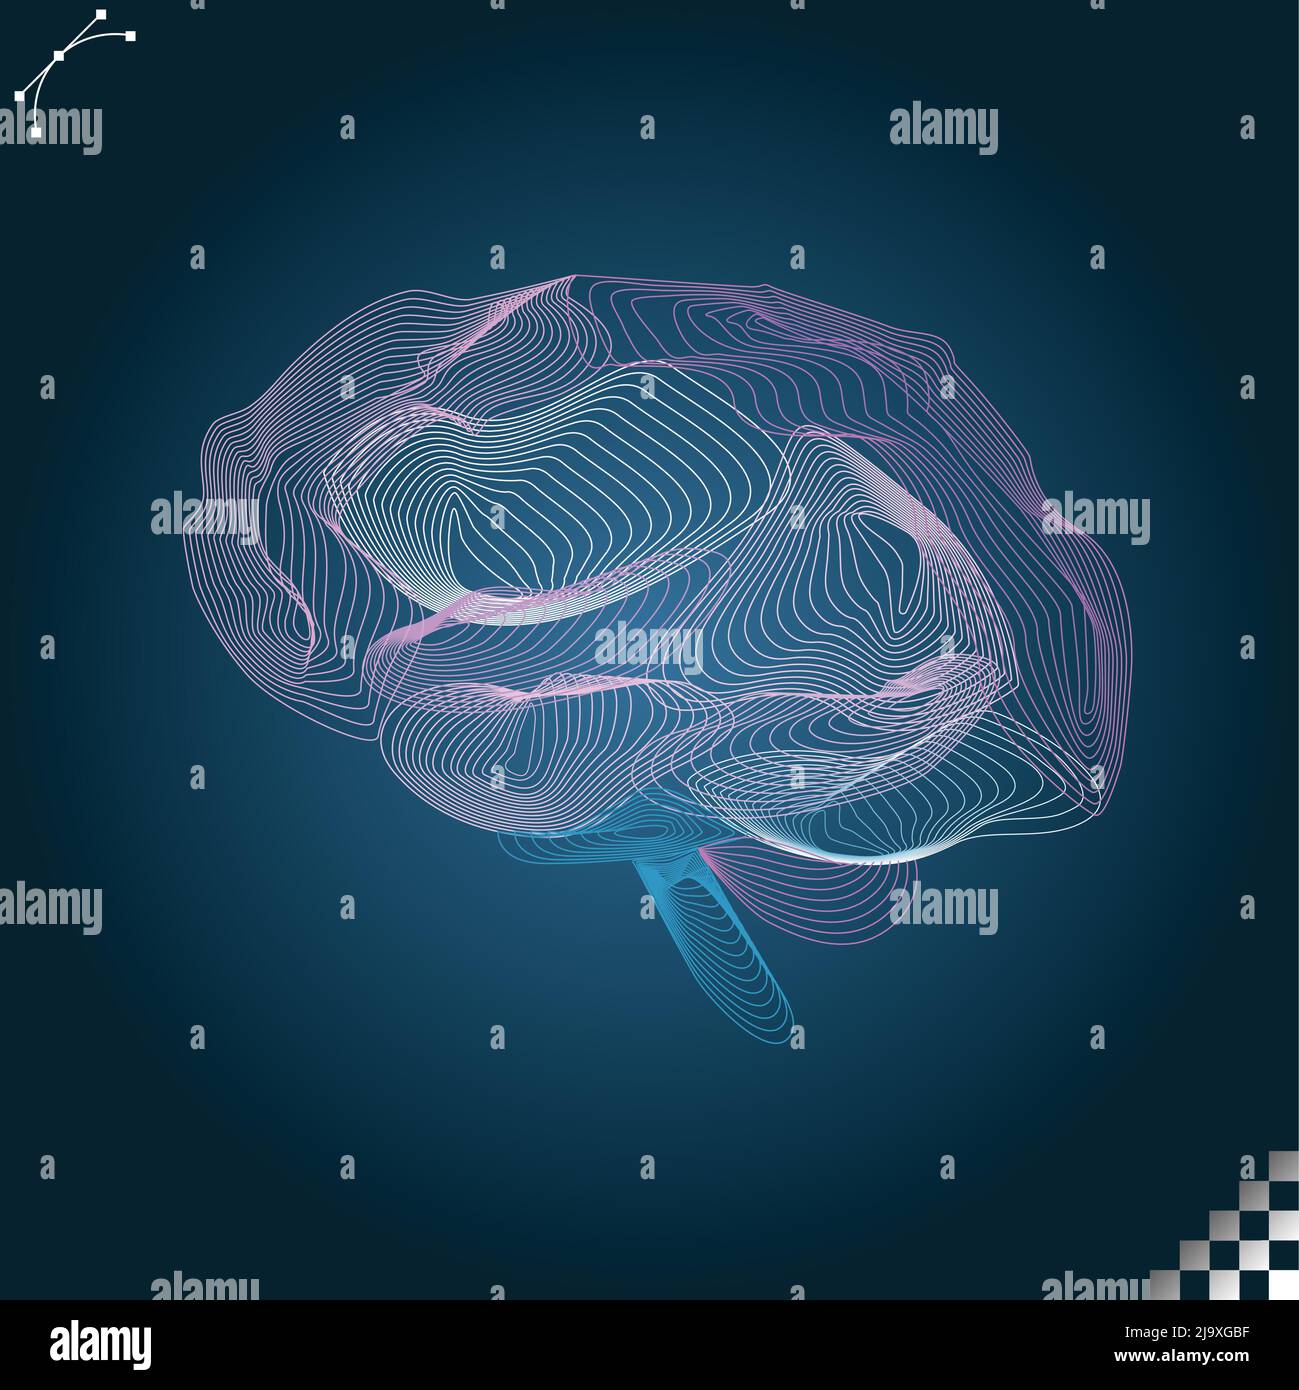 beautiful colorful human brain cerebellum organ side view line art on dark background. Similar to a 3D modeling rig, geometric mesh pattern Stock Vector